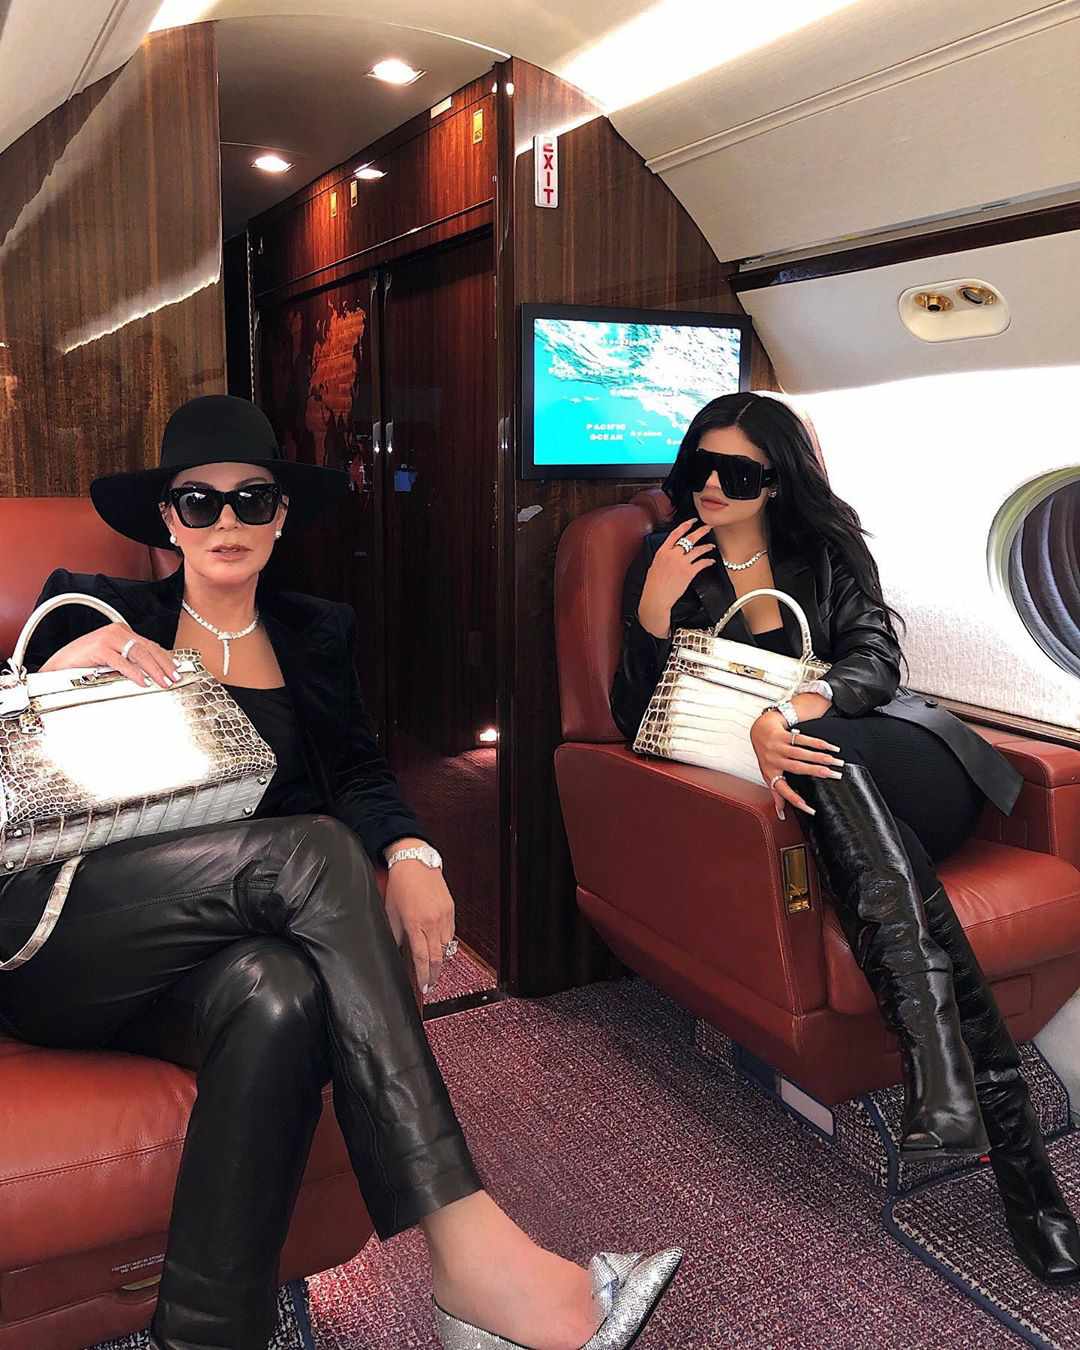 Most Expensive Hermès Birkin Bags Of All Time